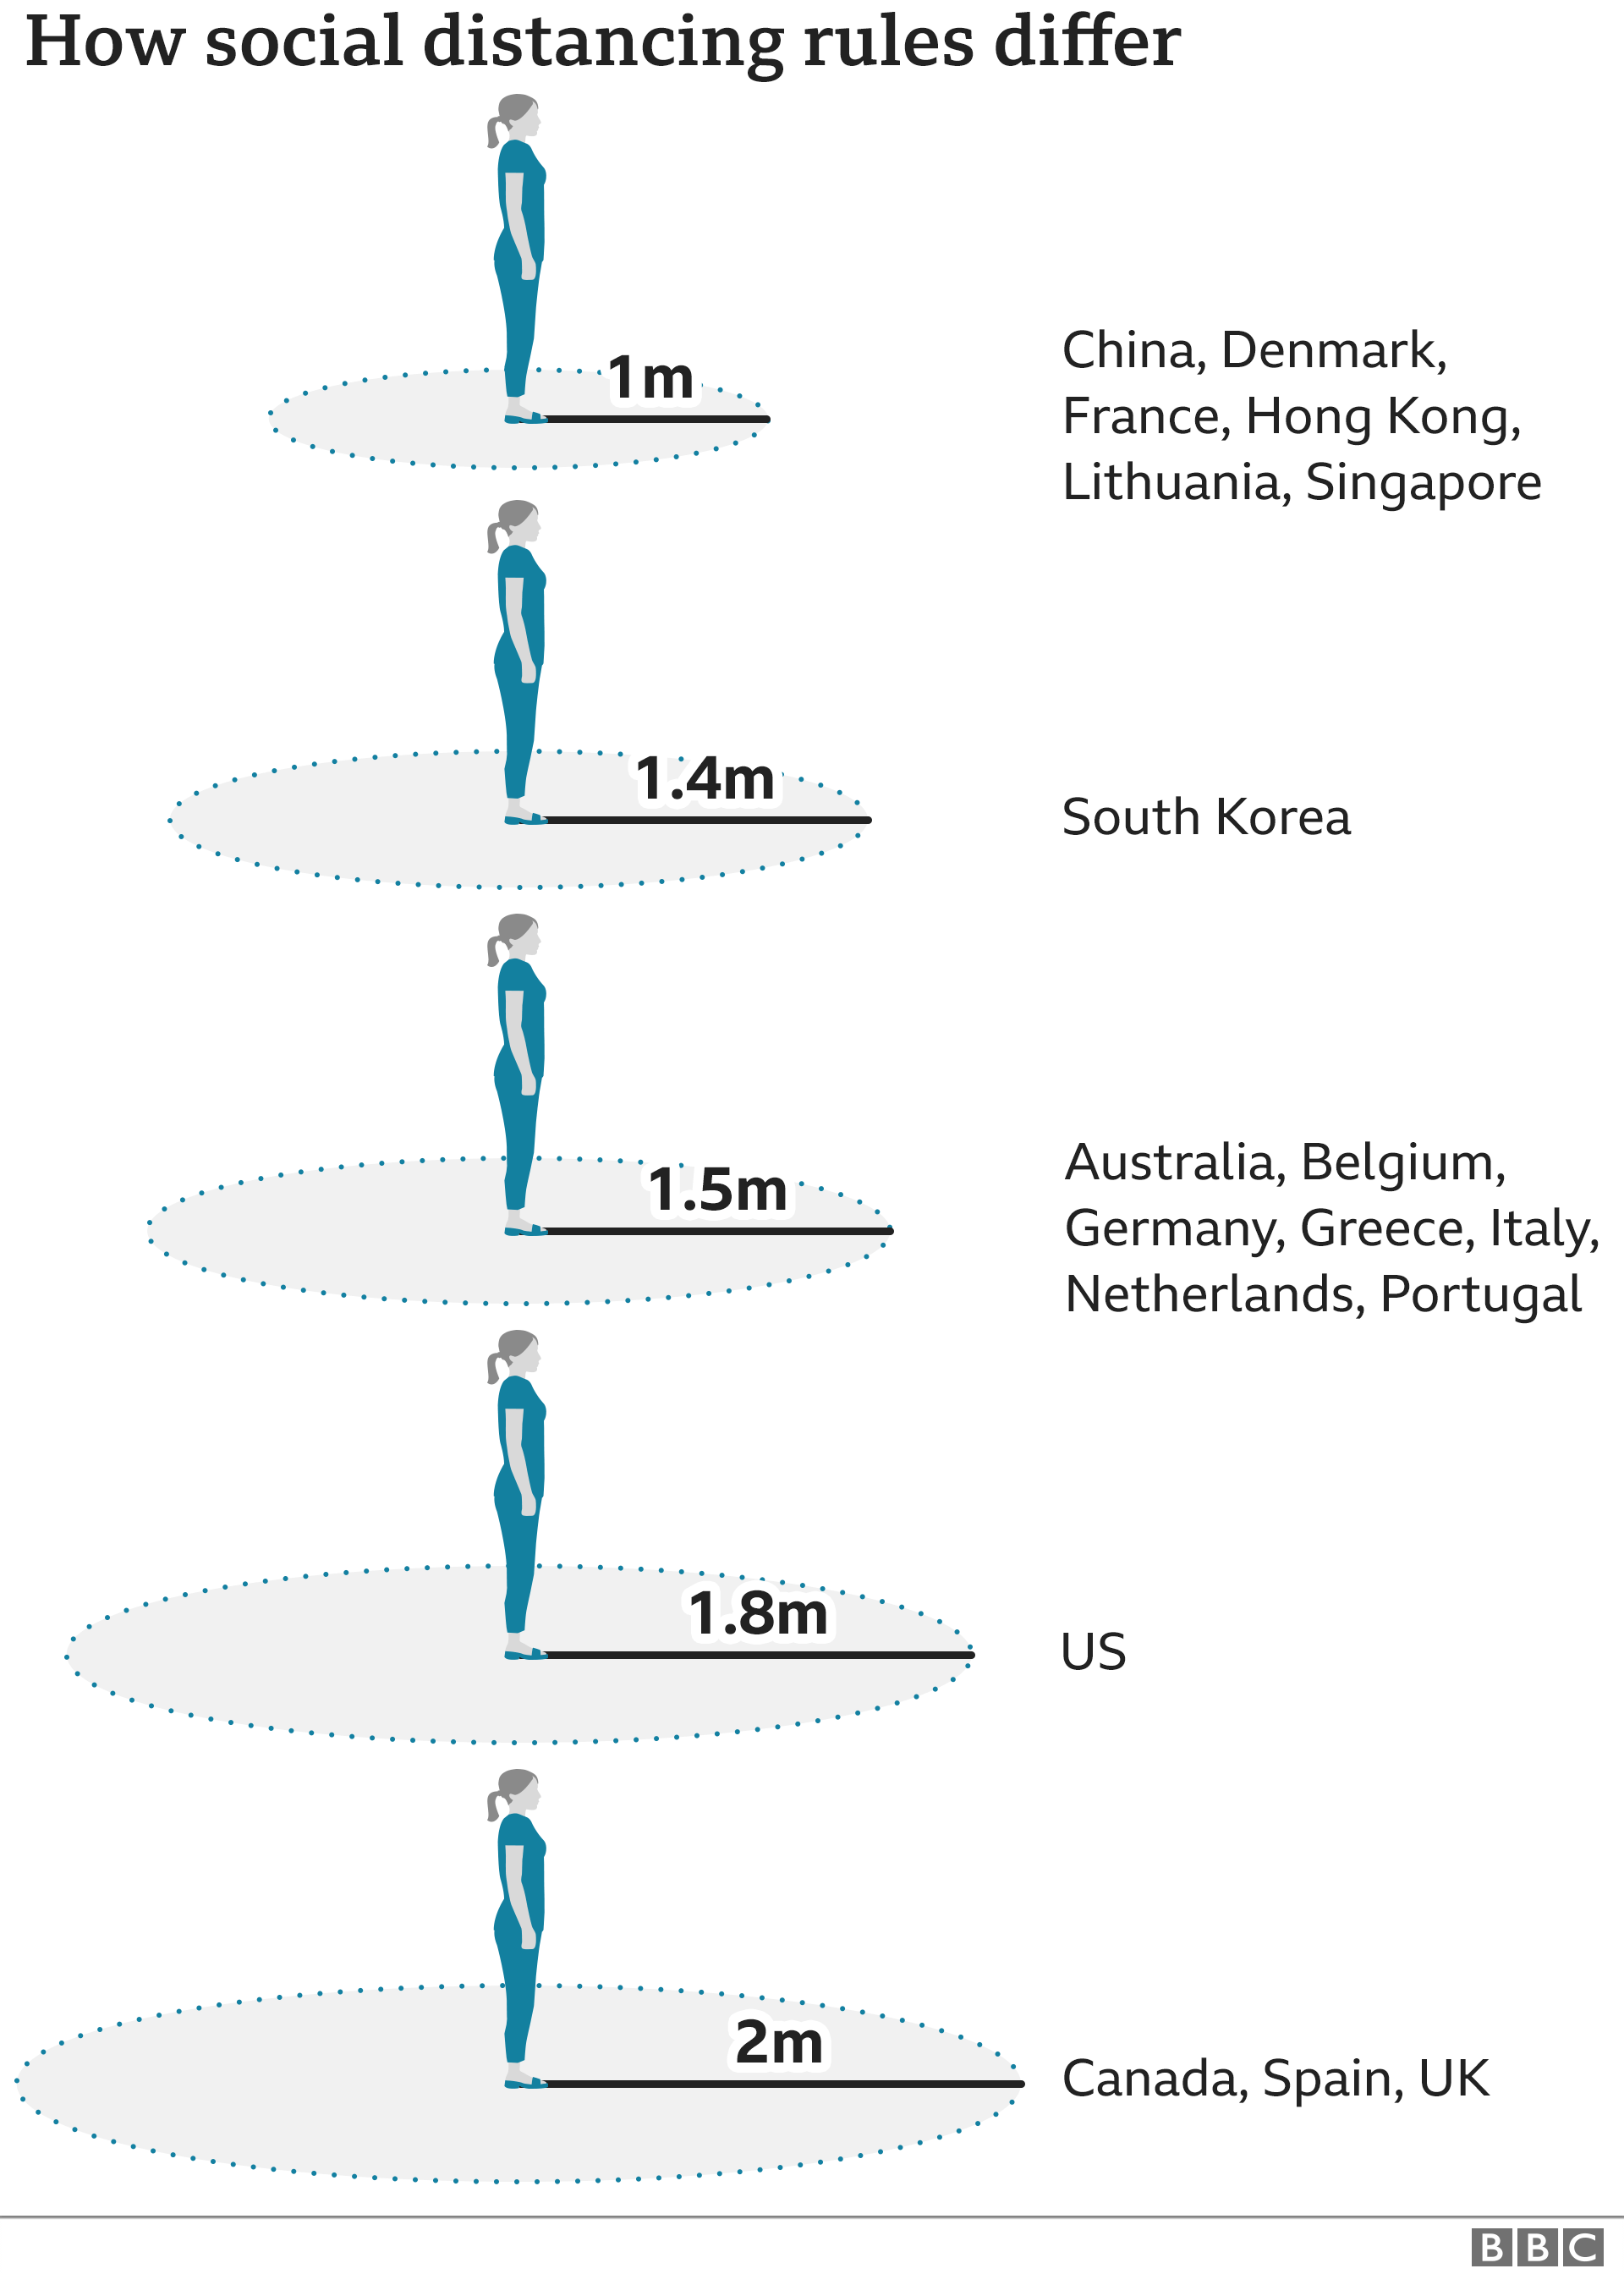 Graphic of social distancing rules around the world